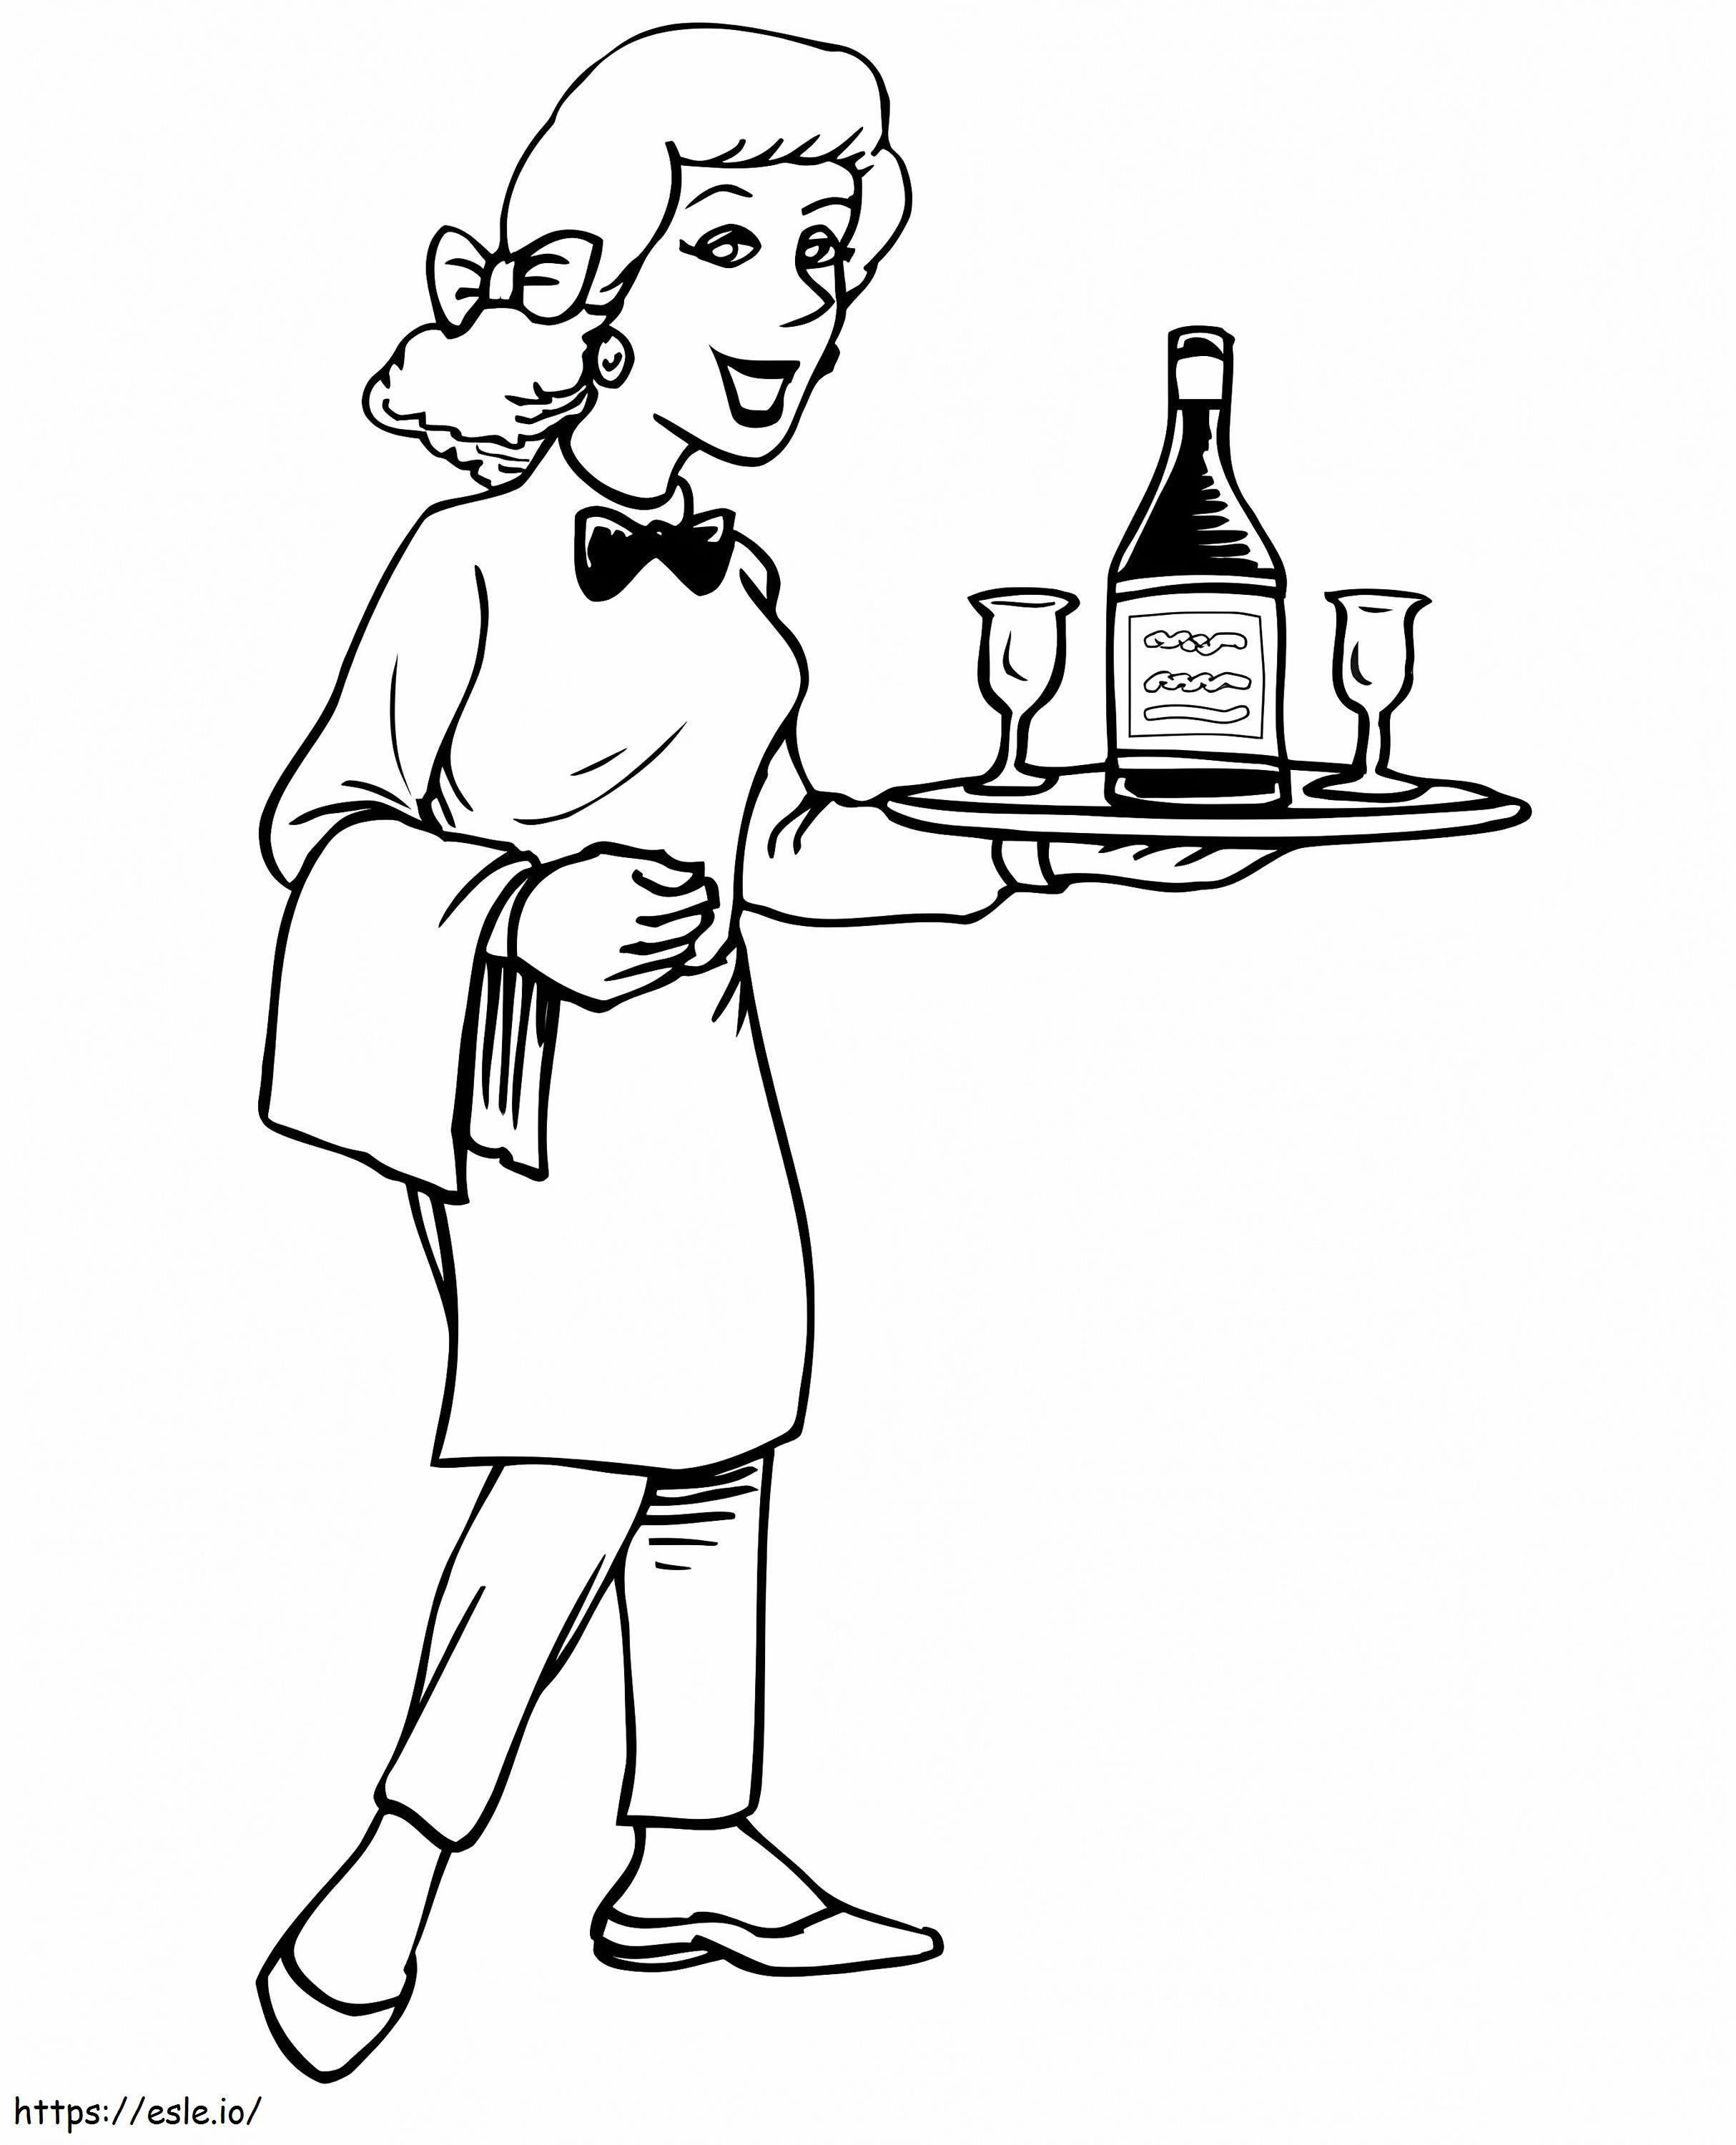 Waitress Is Smiling coloring page